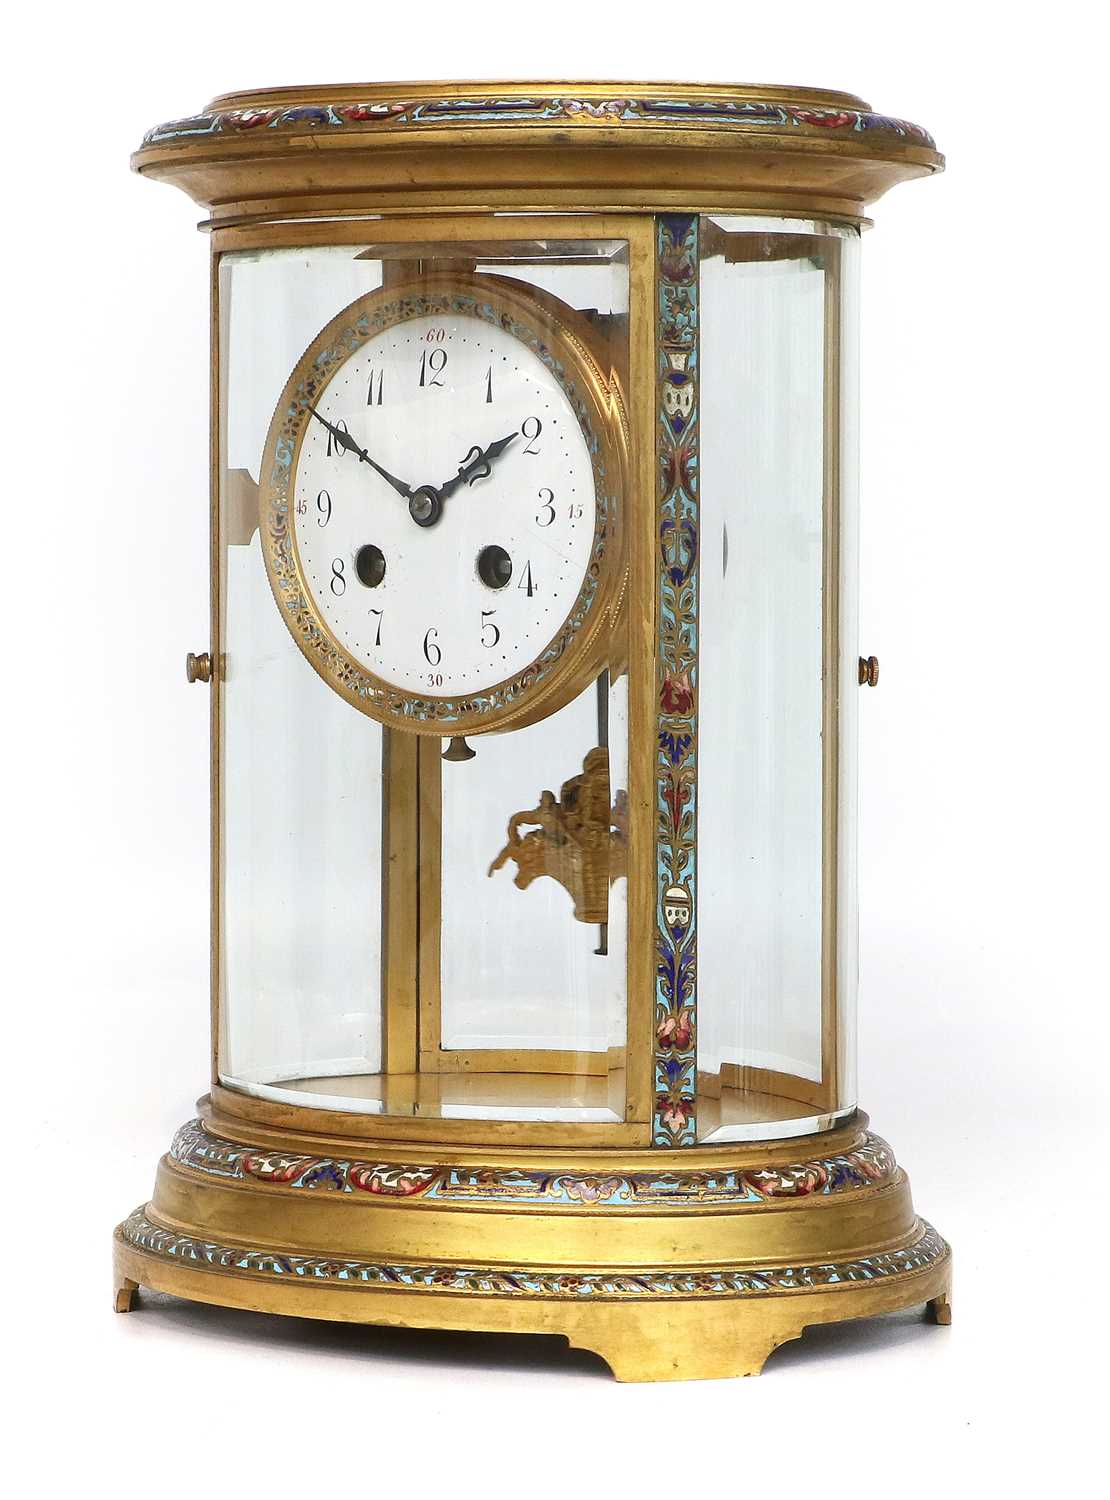 A French Oval Shaped Brass and Champleve Enamel Striking Mantel Clock, circa 1900, oval shaped - Image 2 of 6